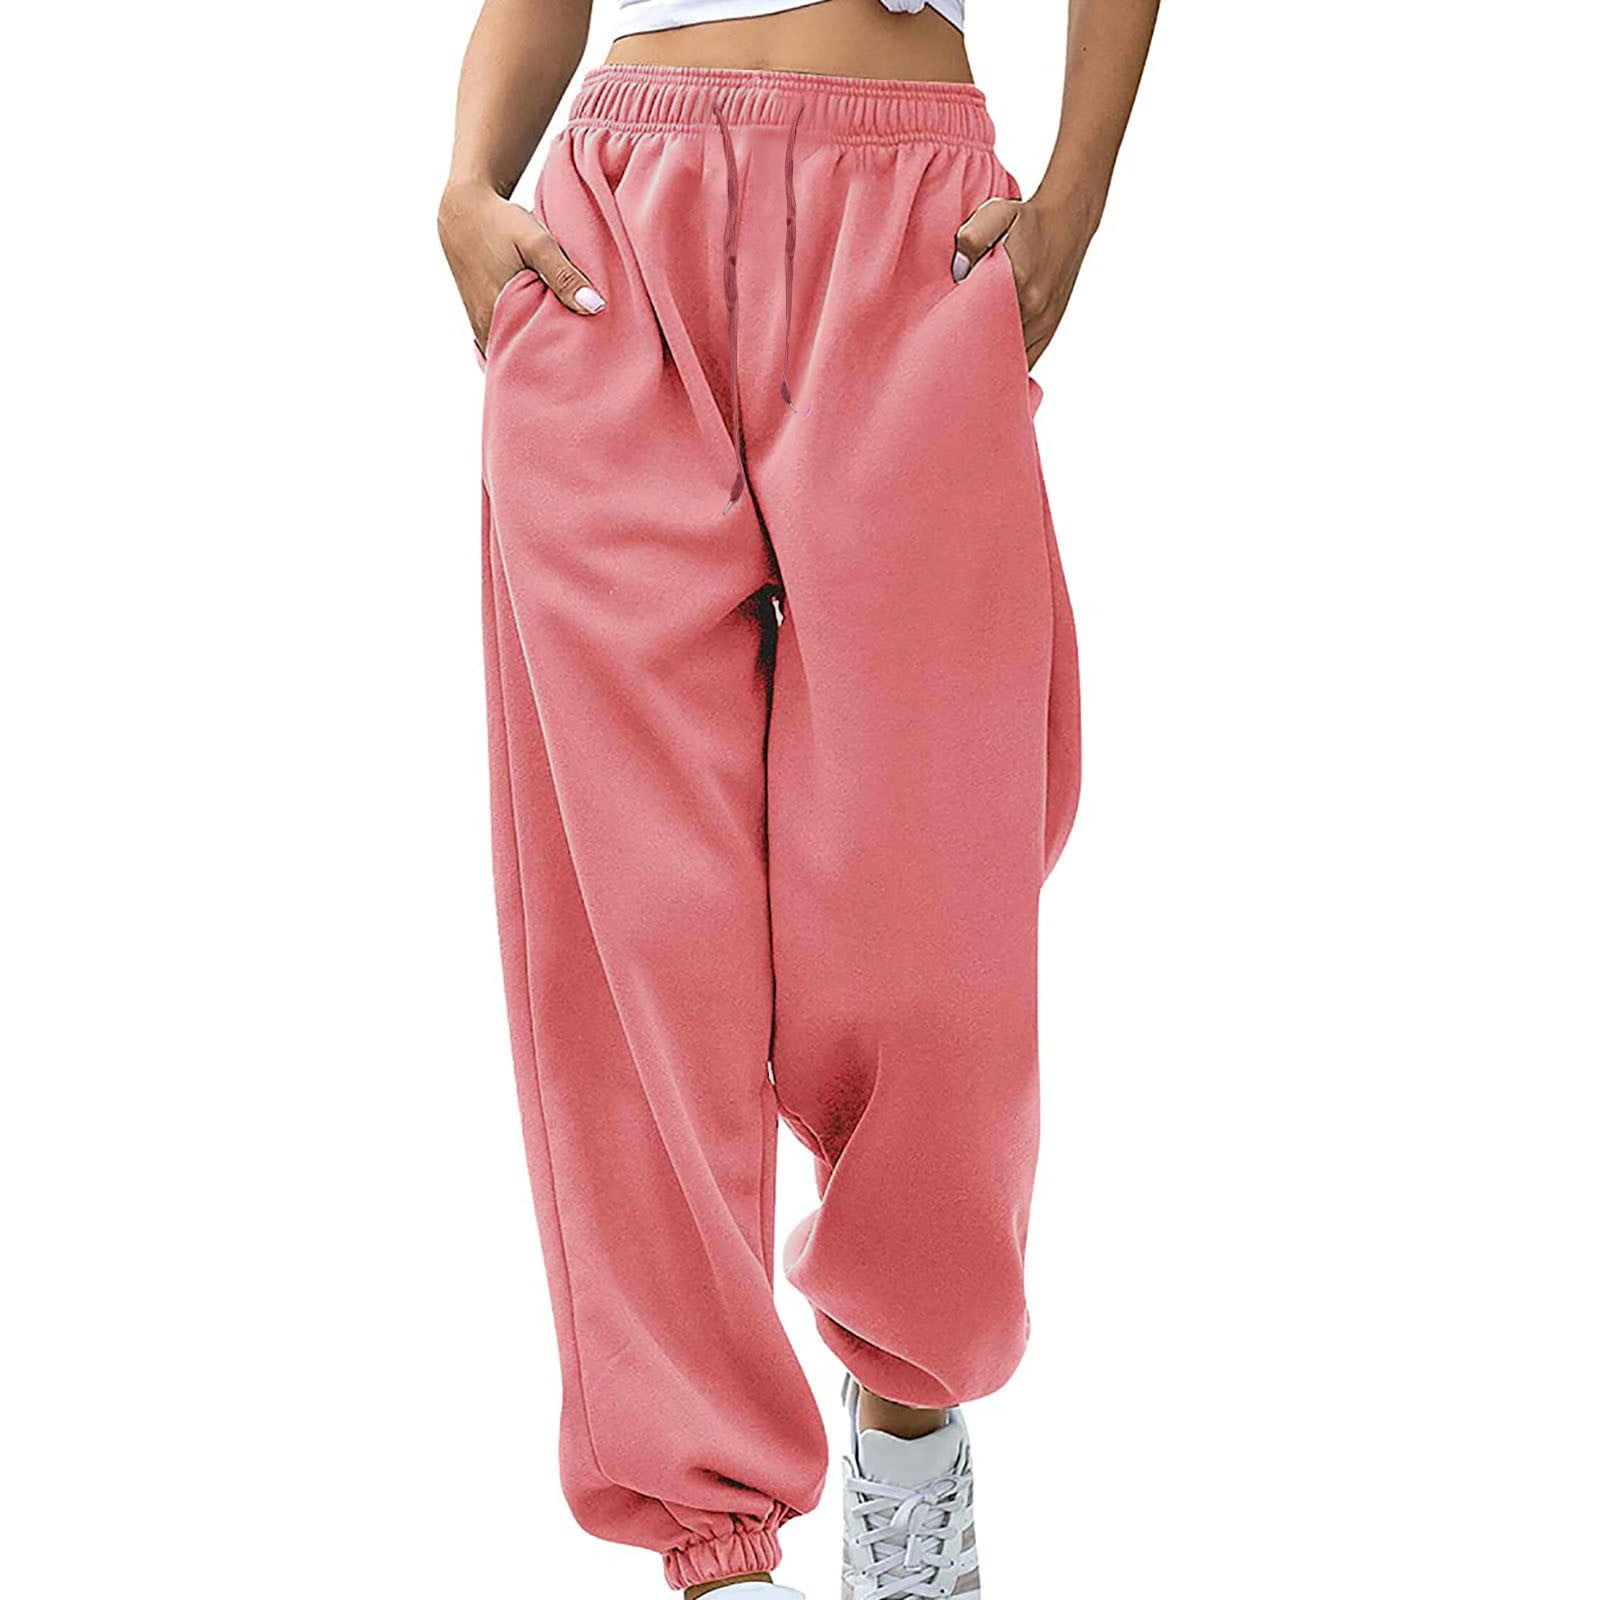 SUNSIOM Women's Reflective Pants Night Visibility Jogger High Waist Stretchy Windbreaker Pant Casual Hip Hop Dance Fluorescent Trousers, Size: 2XL